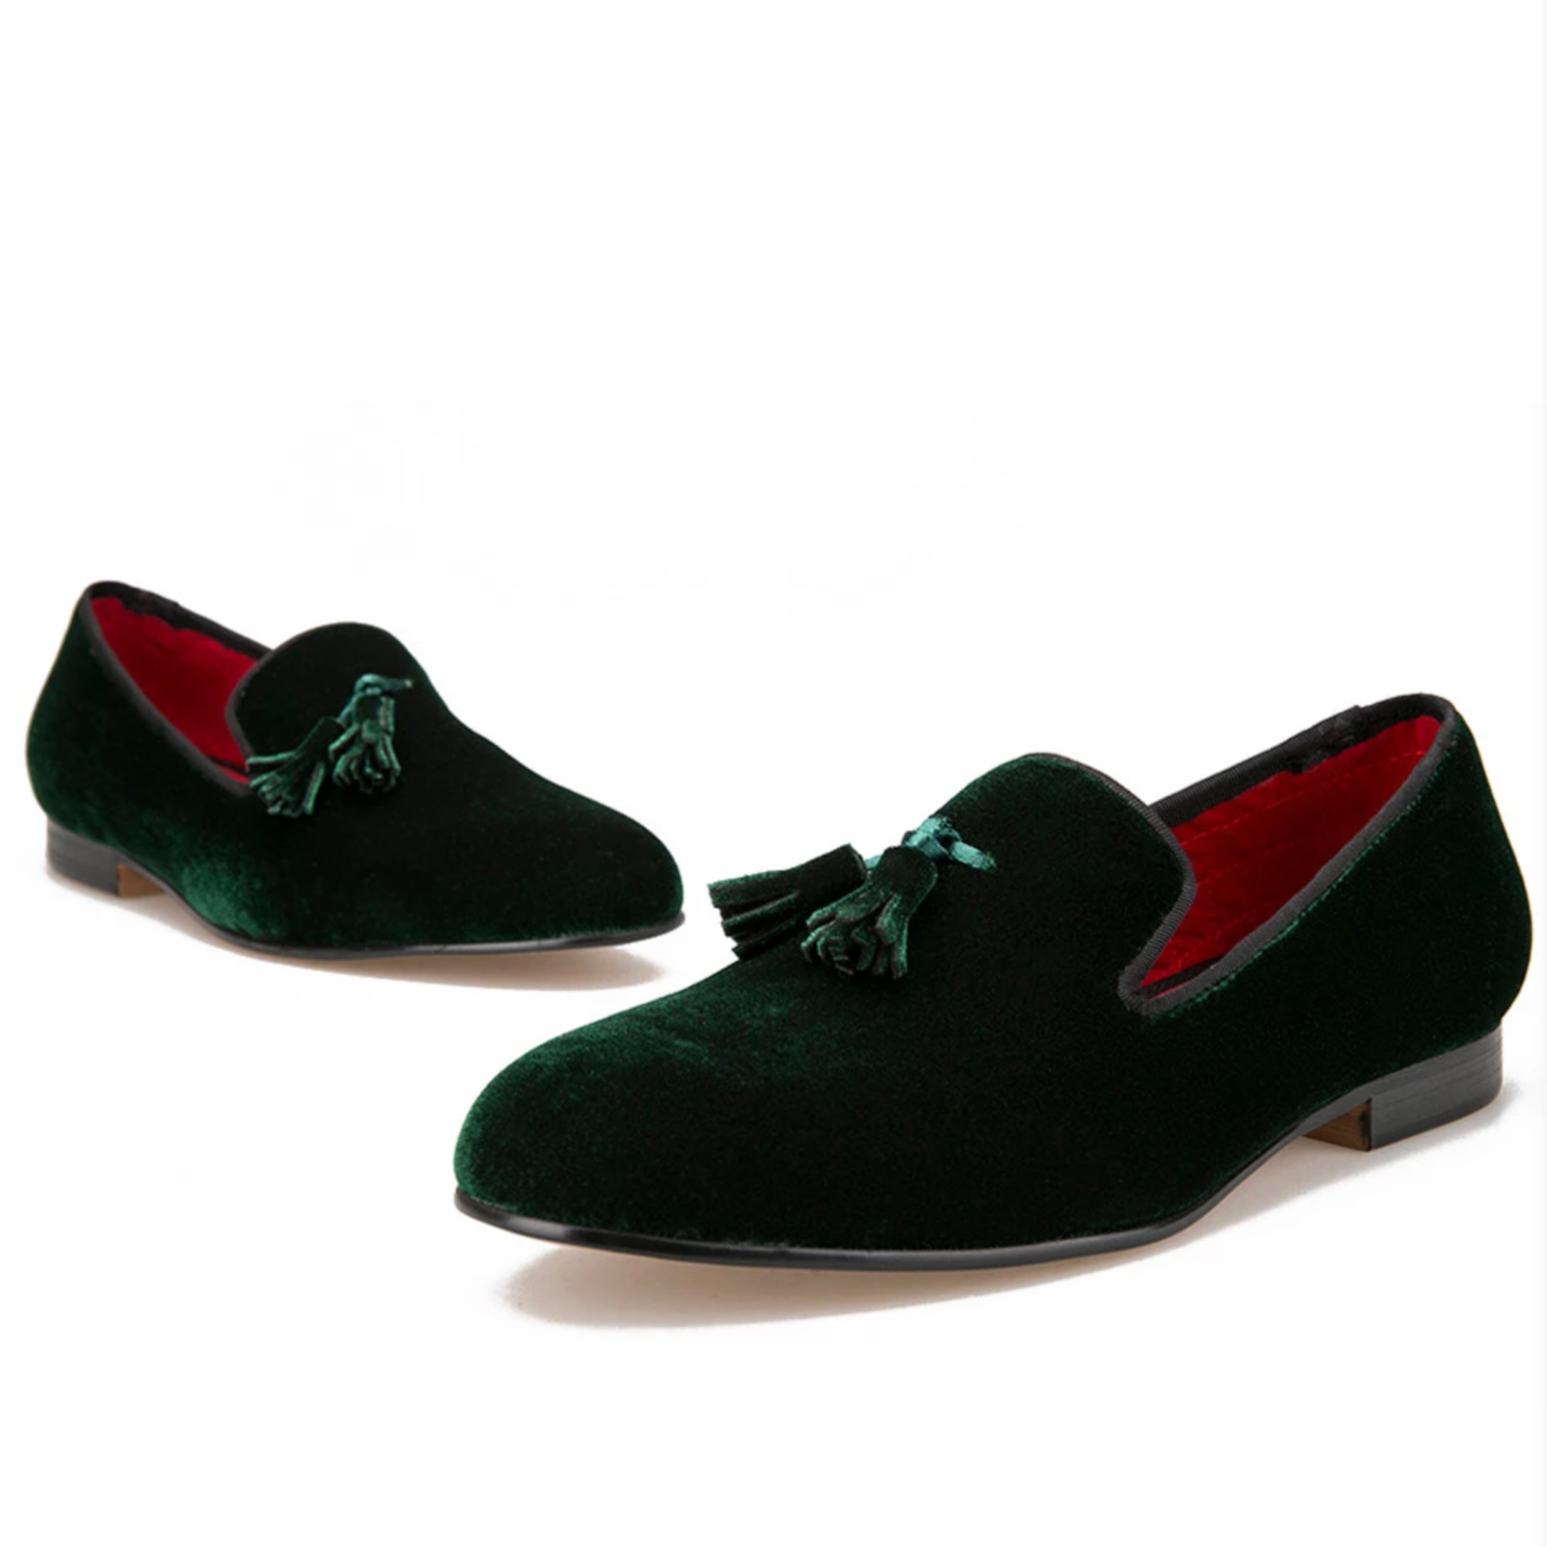 Forest-green velvet-look tasselled loafers with red quilted lining.